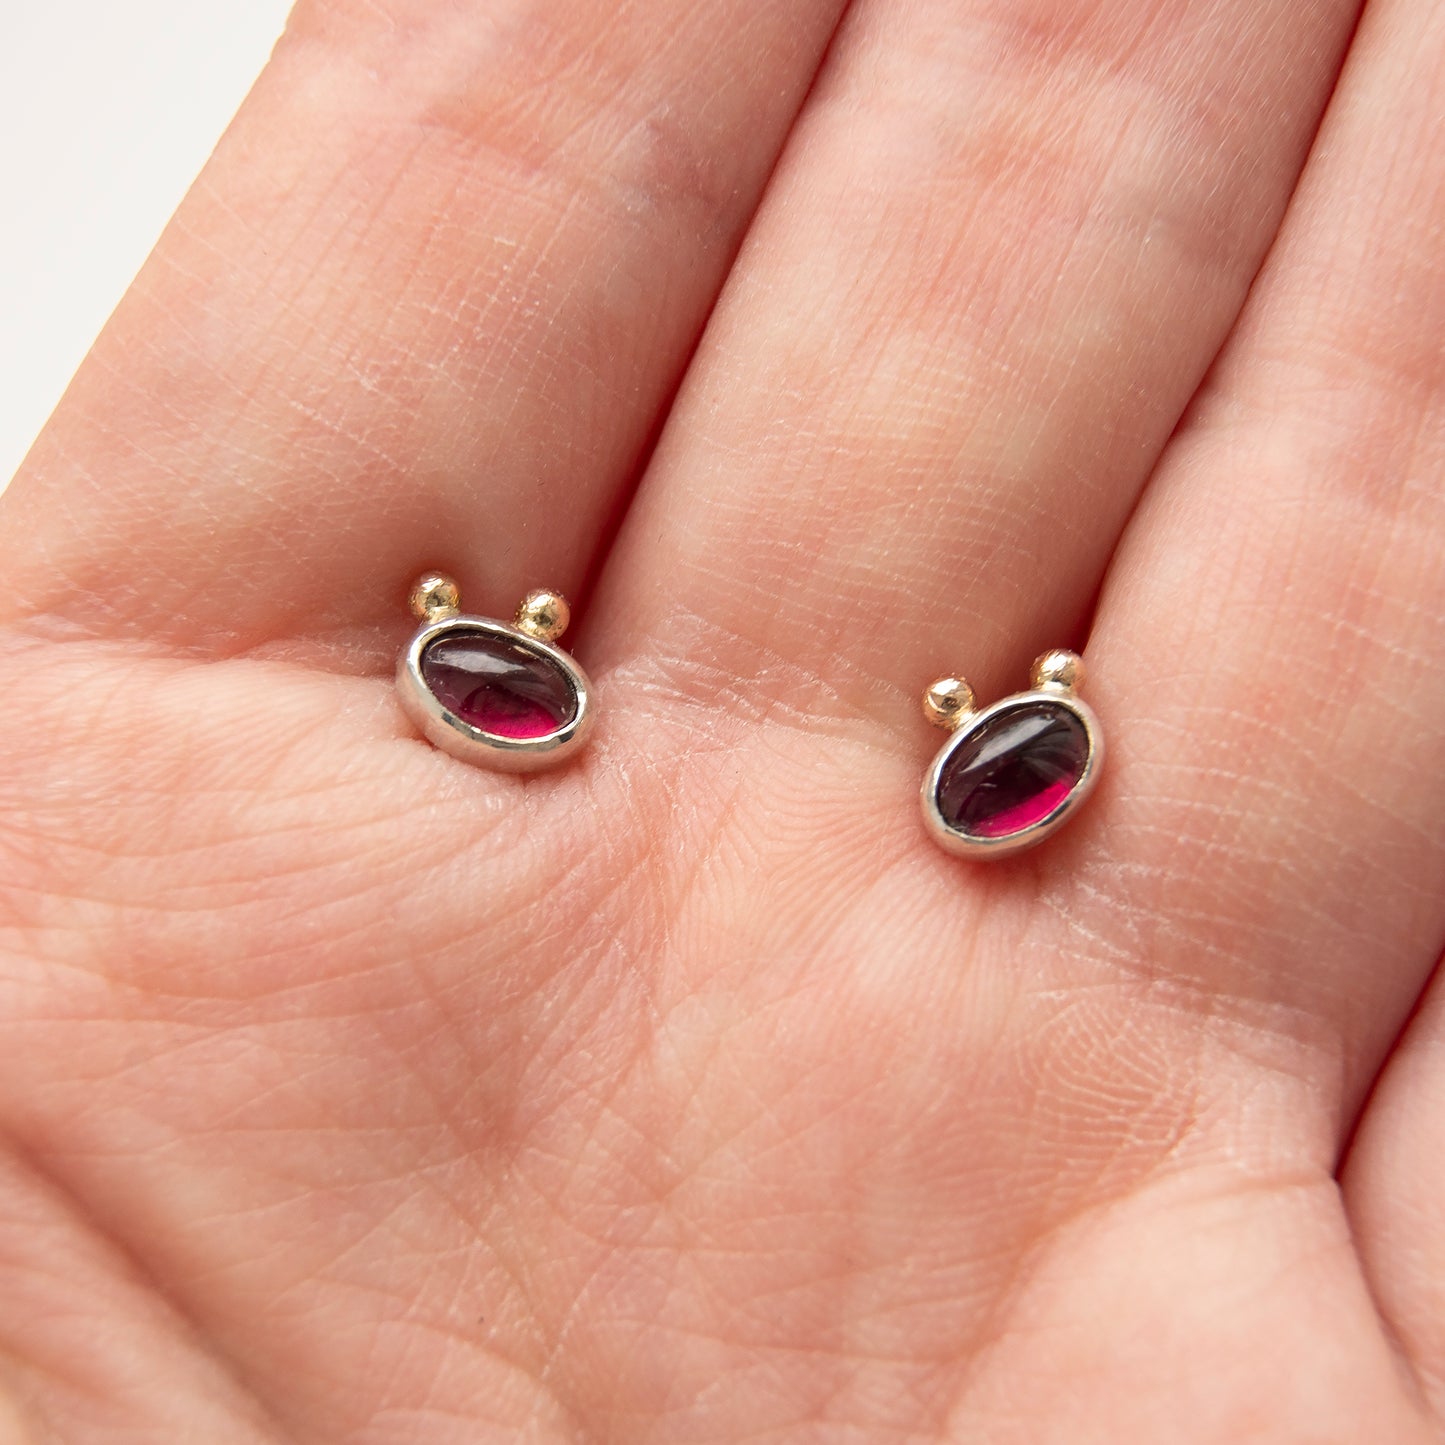 Garnet Studs With 2 Gold Beads